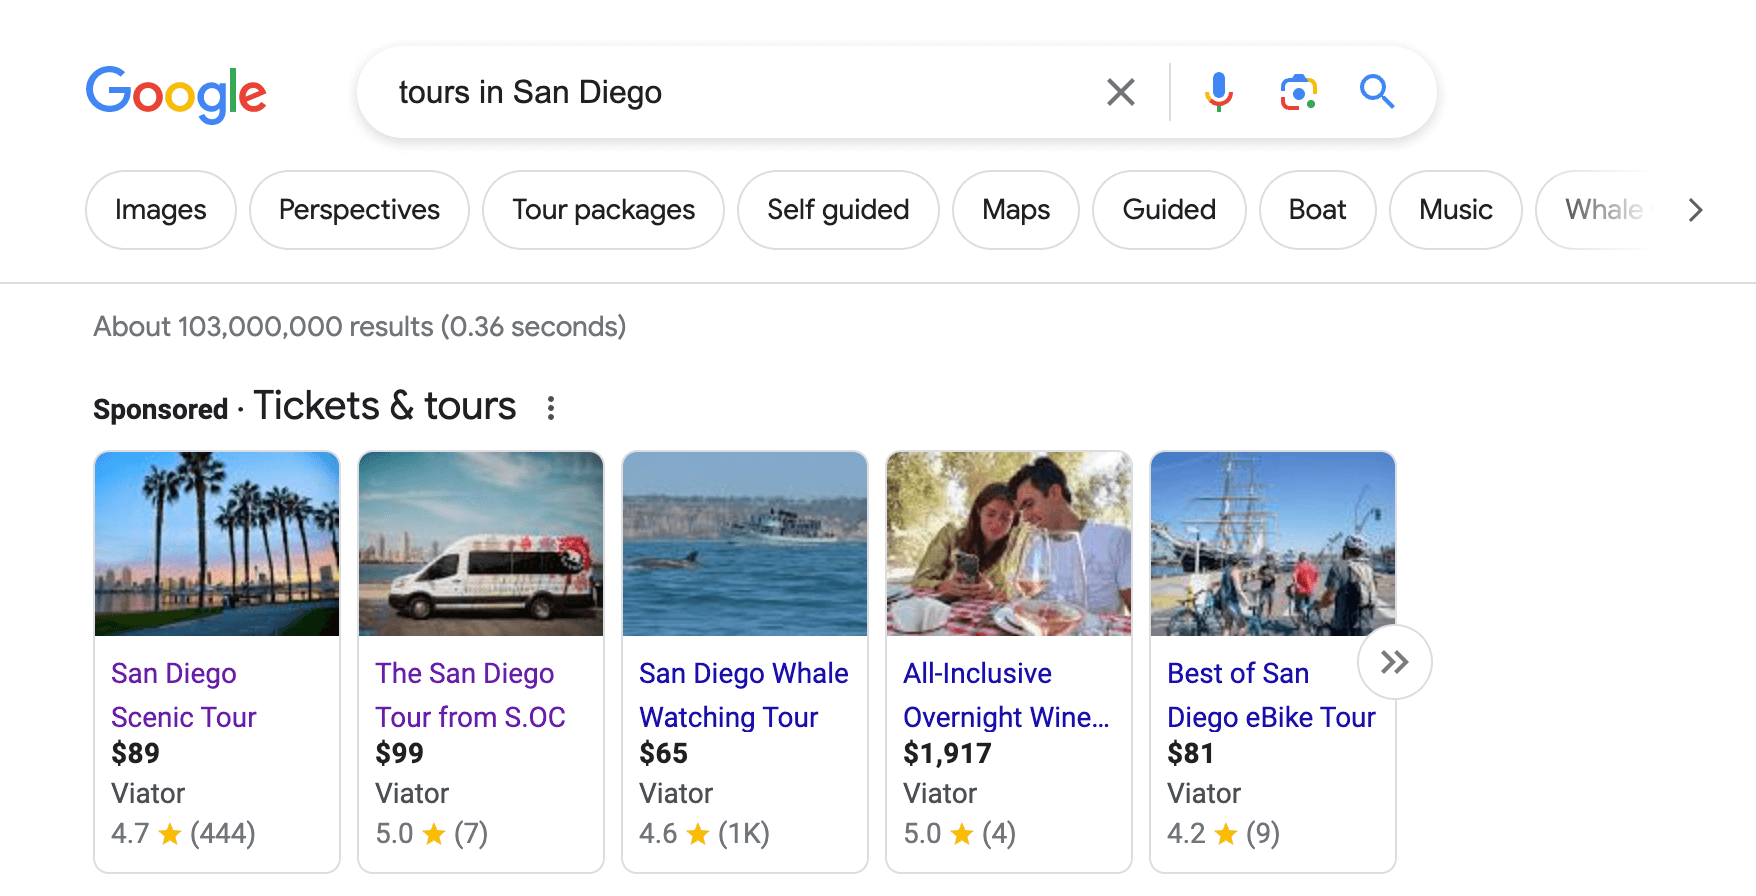 Google search example for tours in San Diego